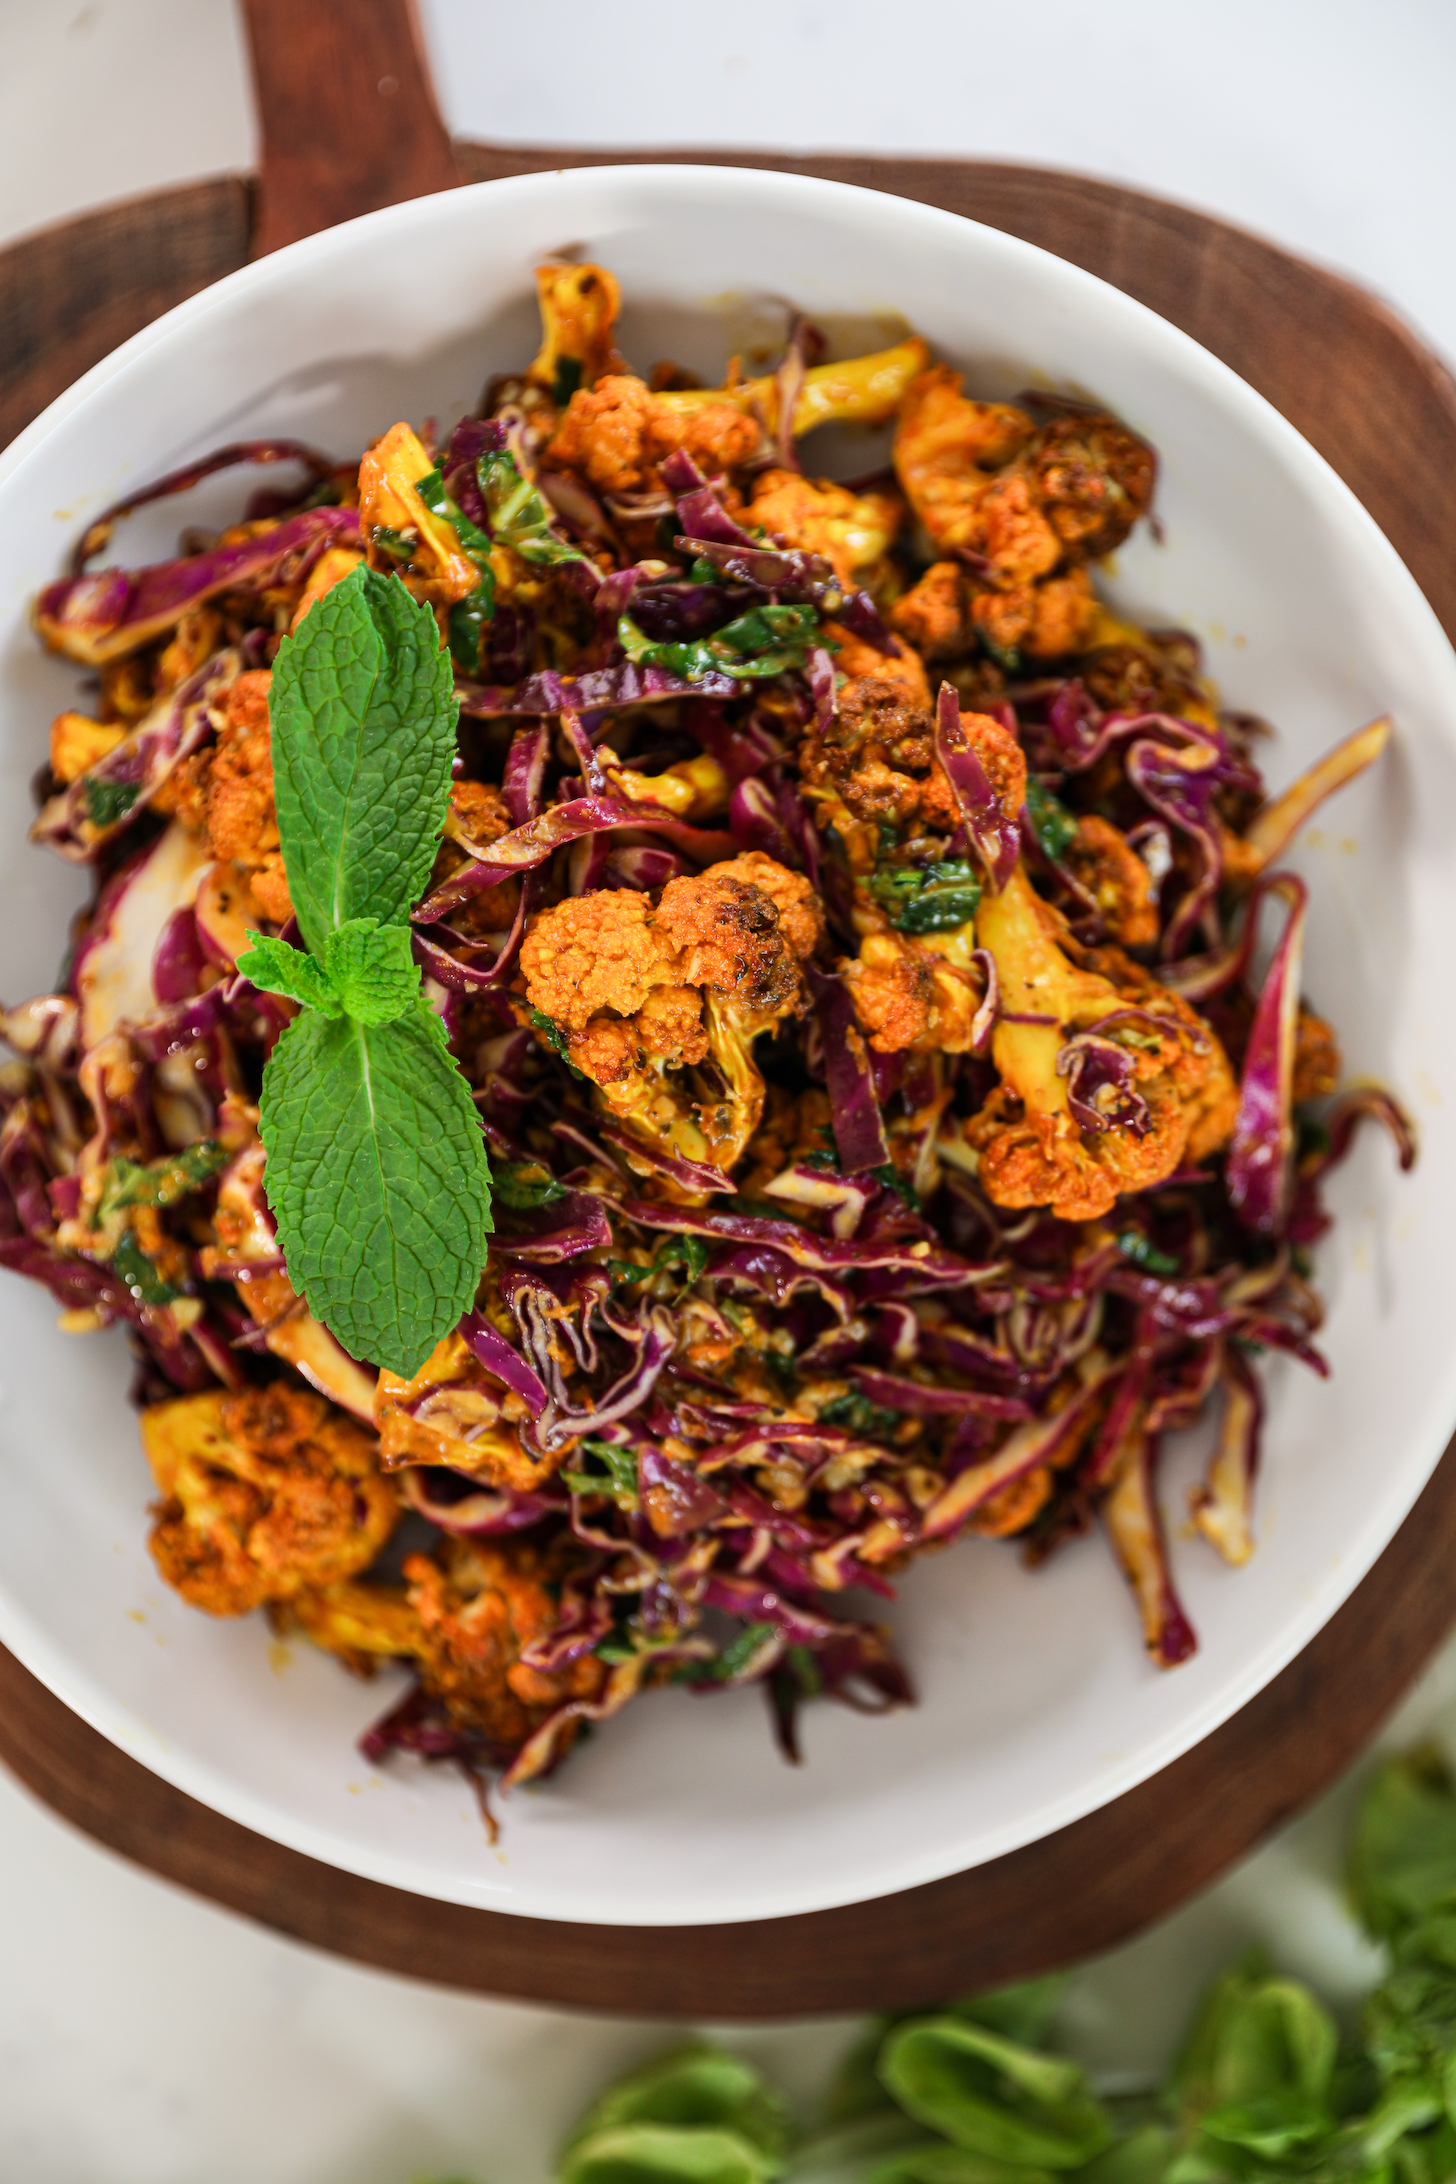 Top view of a bowl of spiced cauliflower and shredded red cabbage mix topped with a sprig of mint.